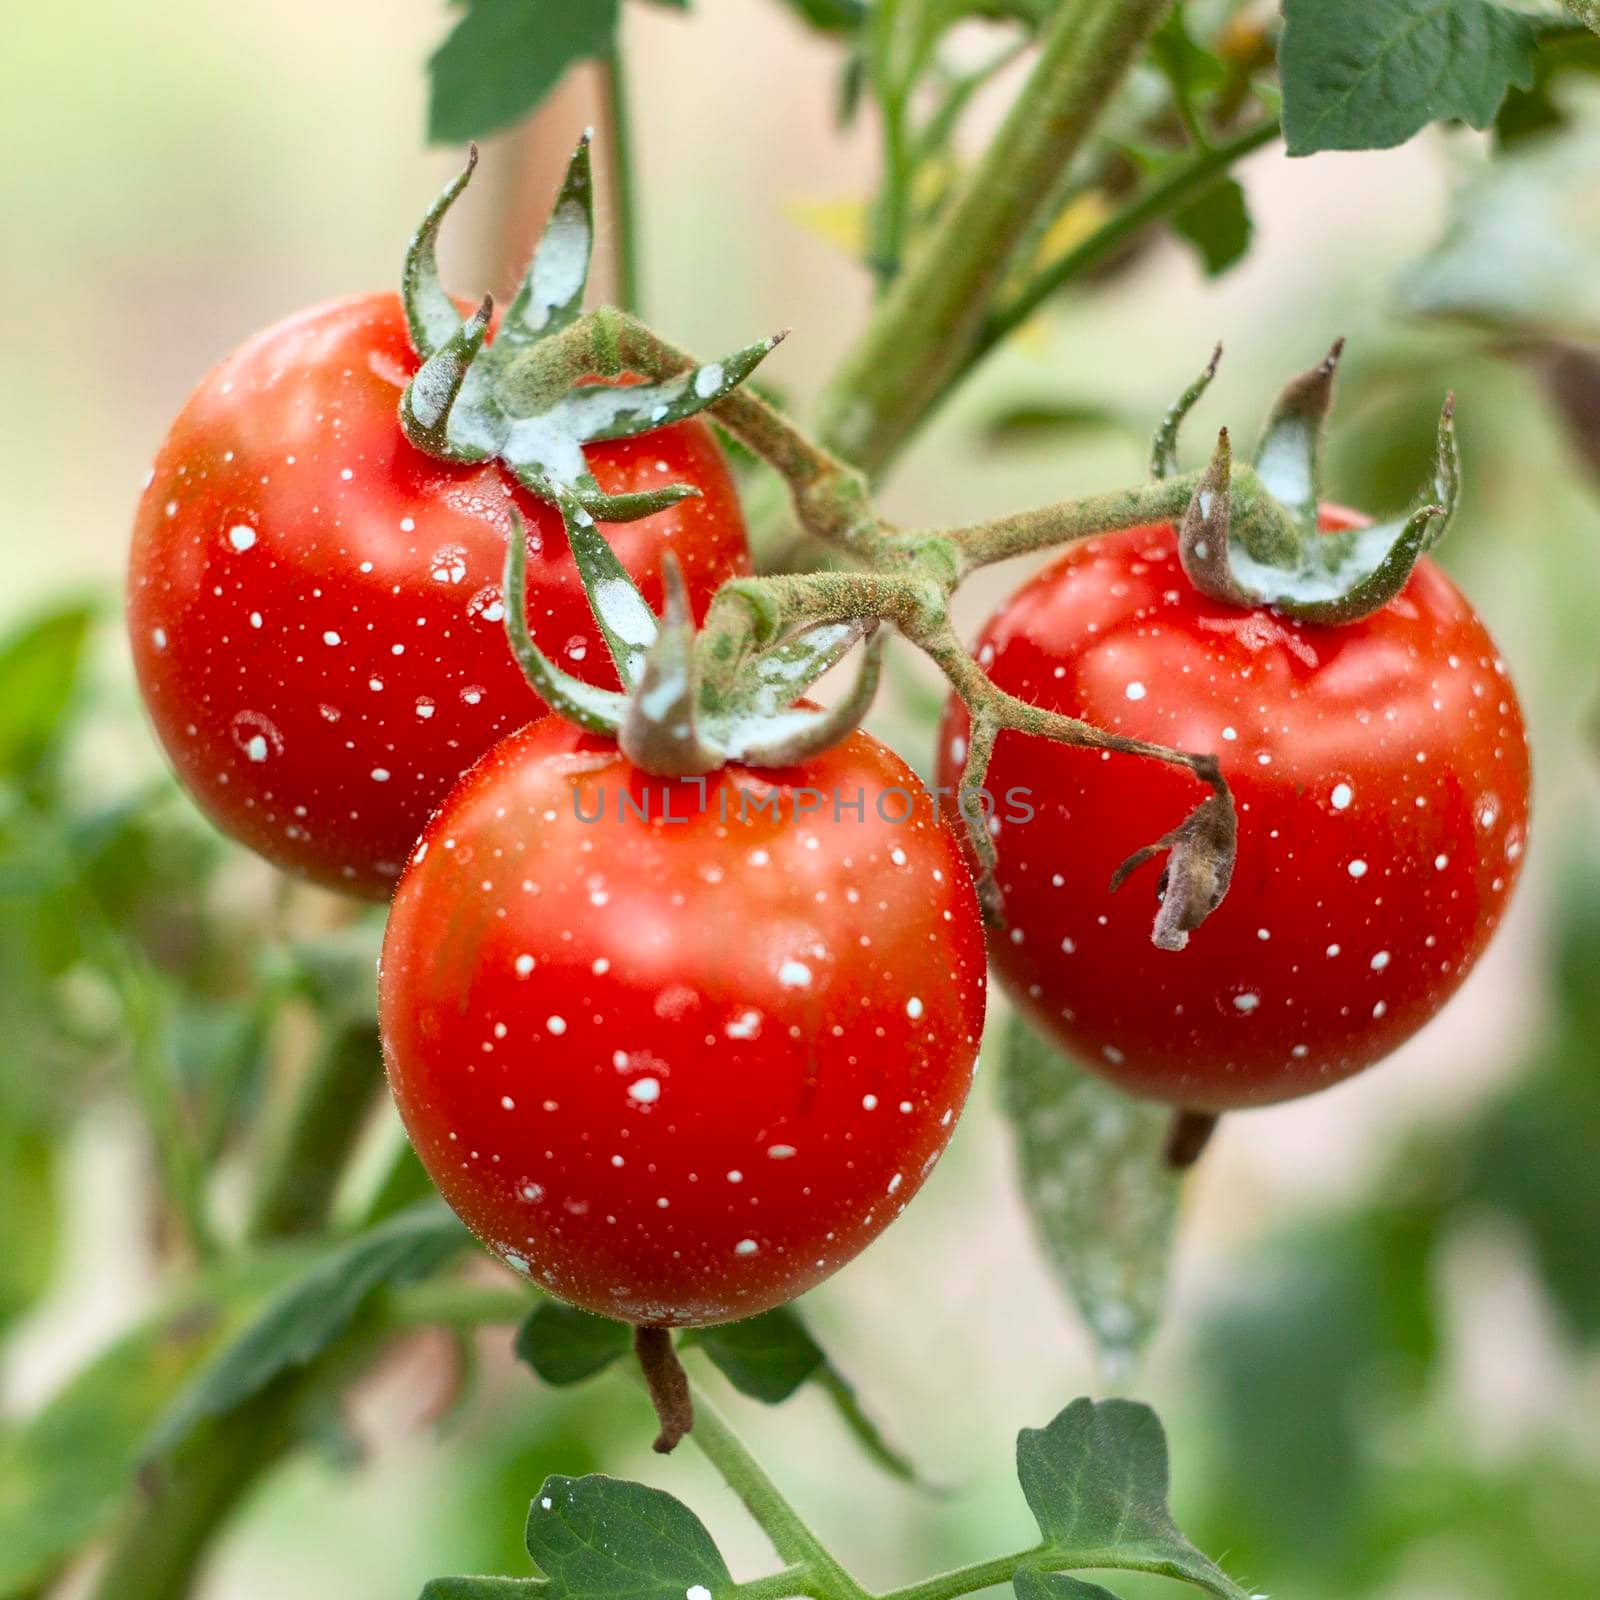 Ripe tomatoes on the branch treated with chemicals